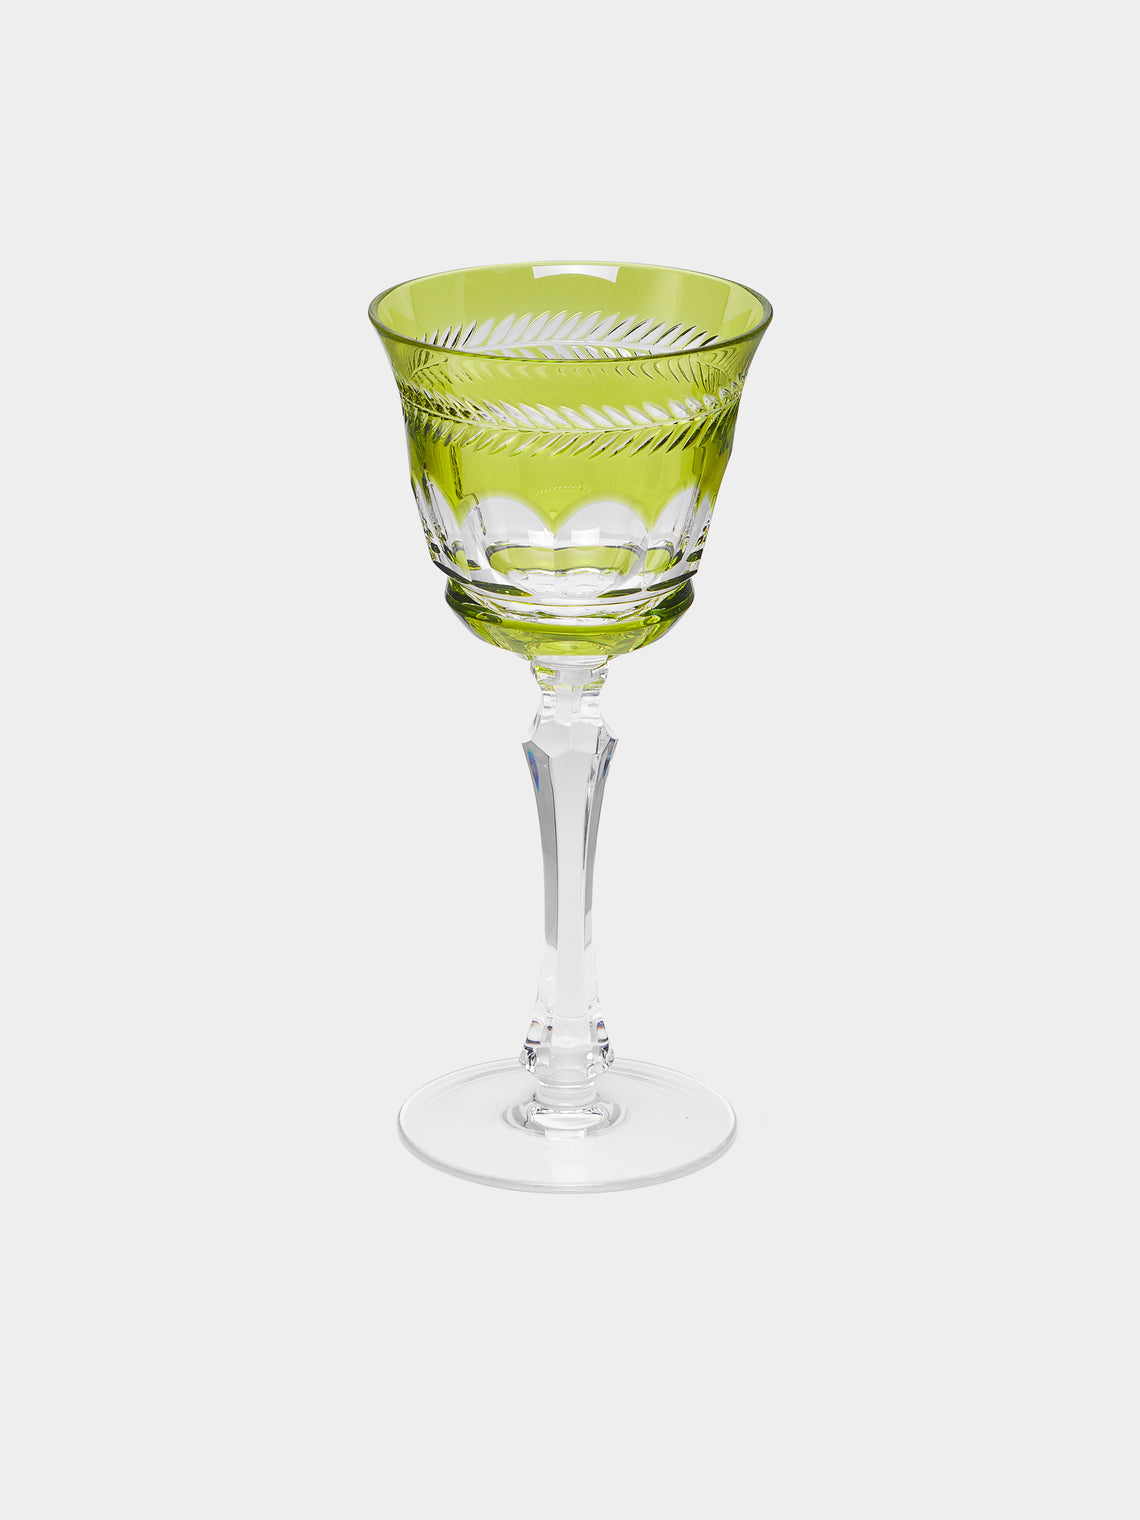 Cristallerie De Montbronn - Chenonceaux Hand-Blown Crystal White Wine Glass -  - ABASK - 